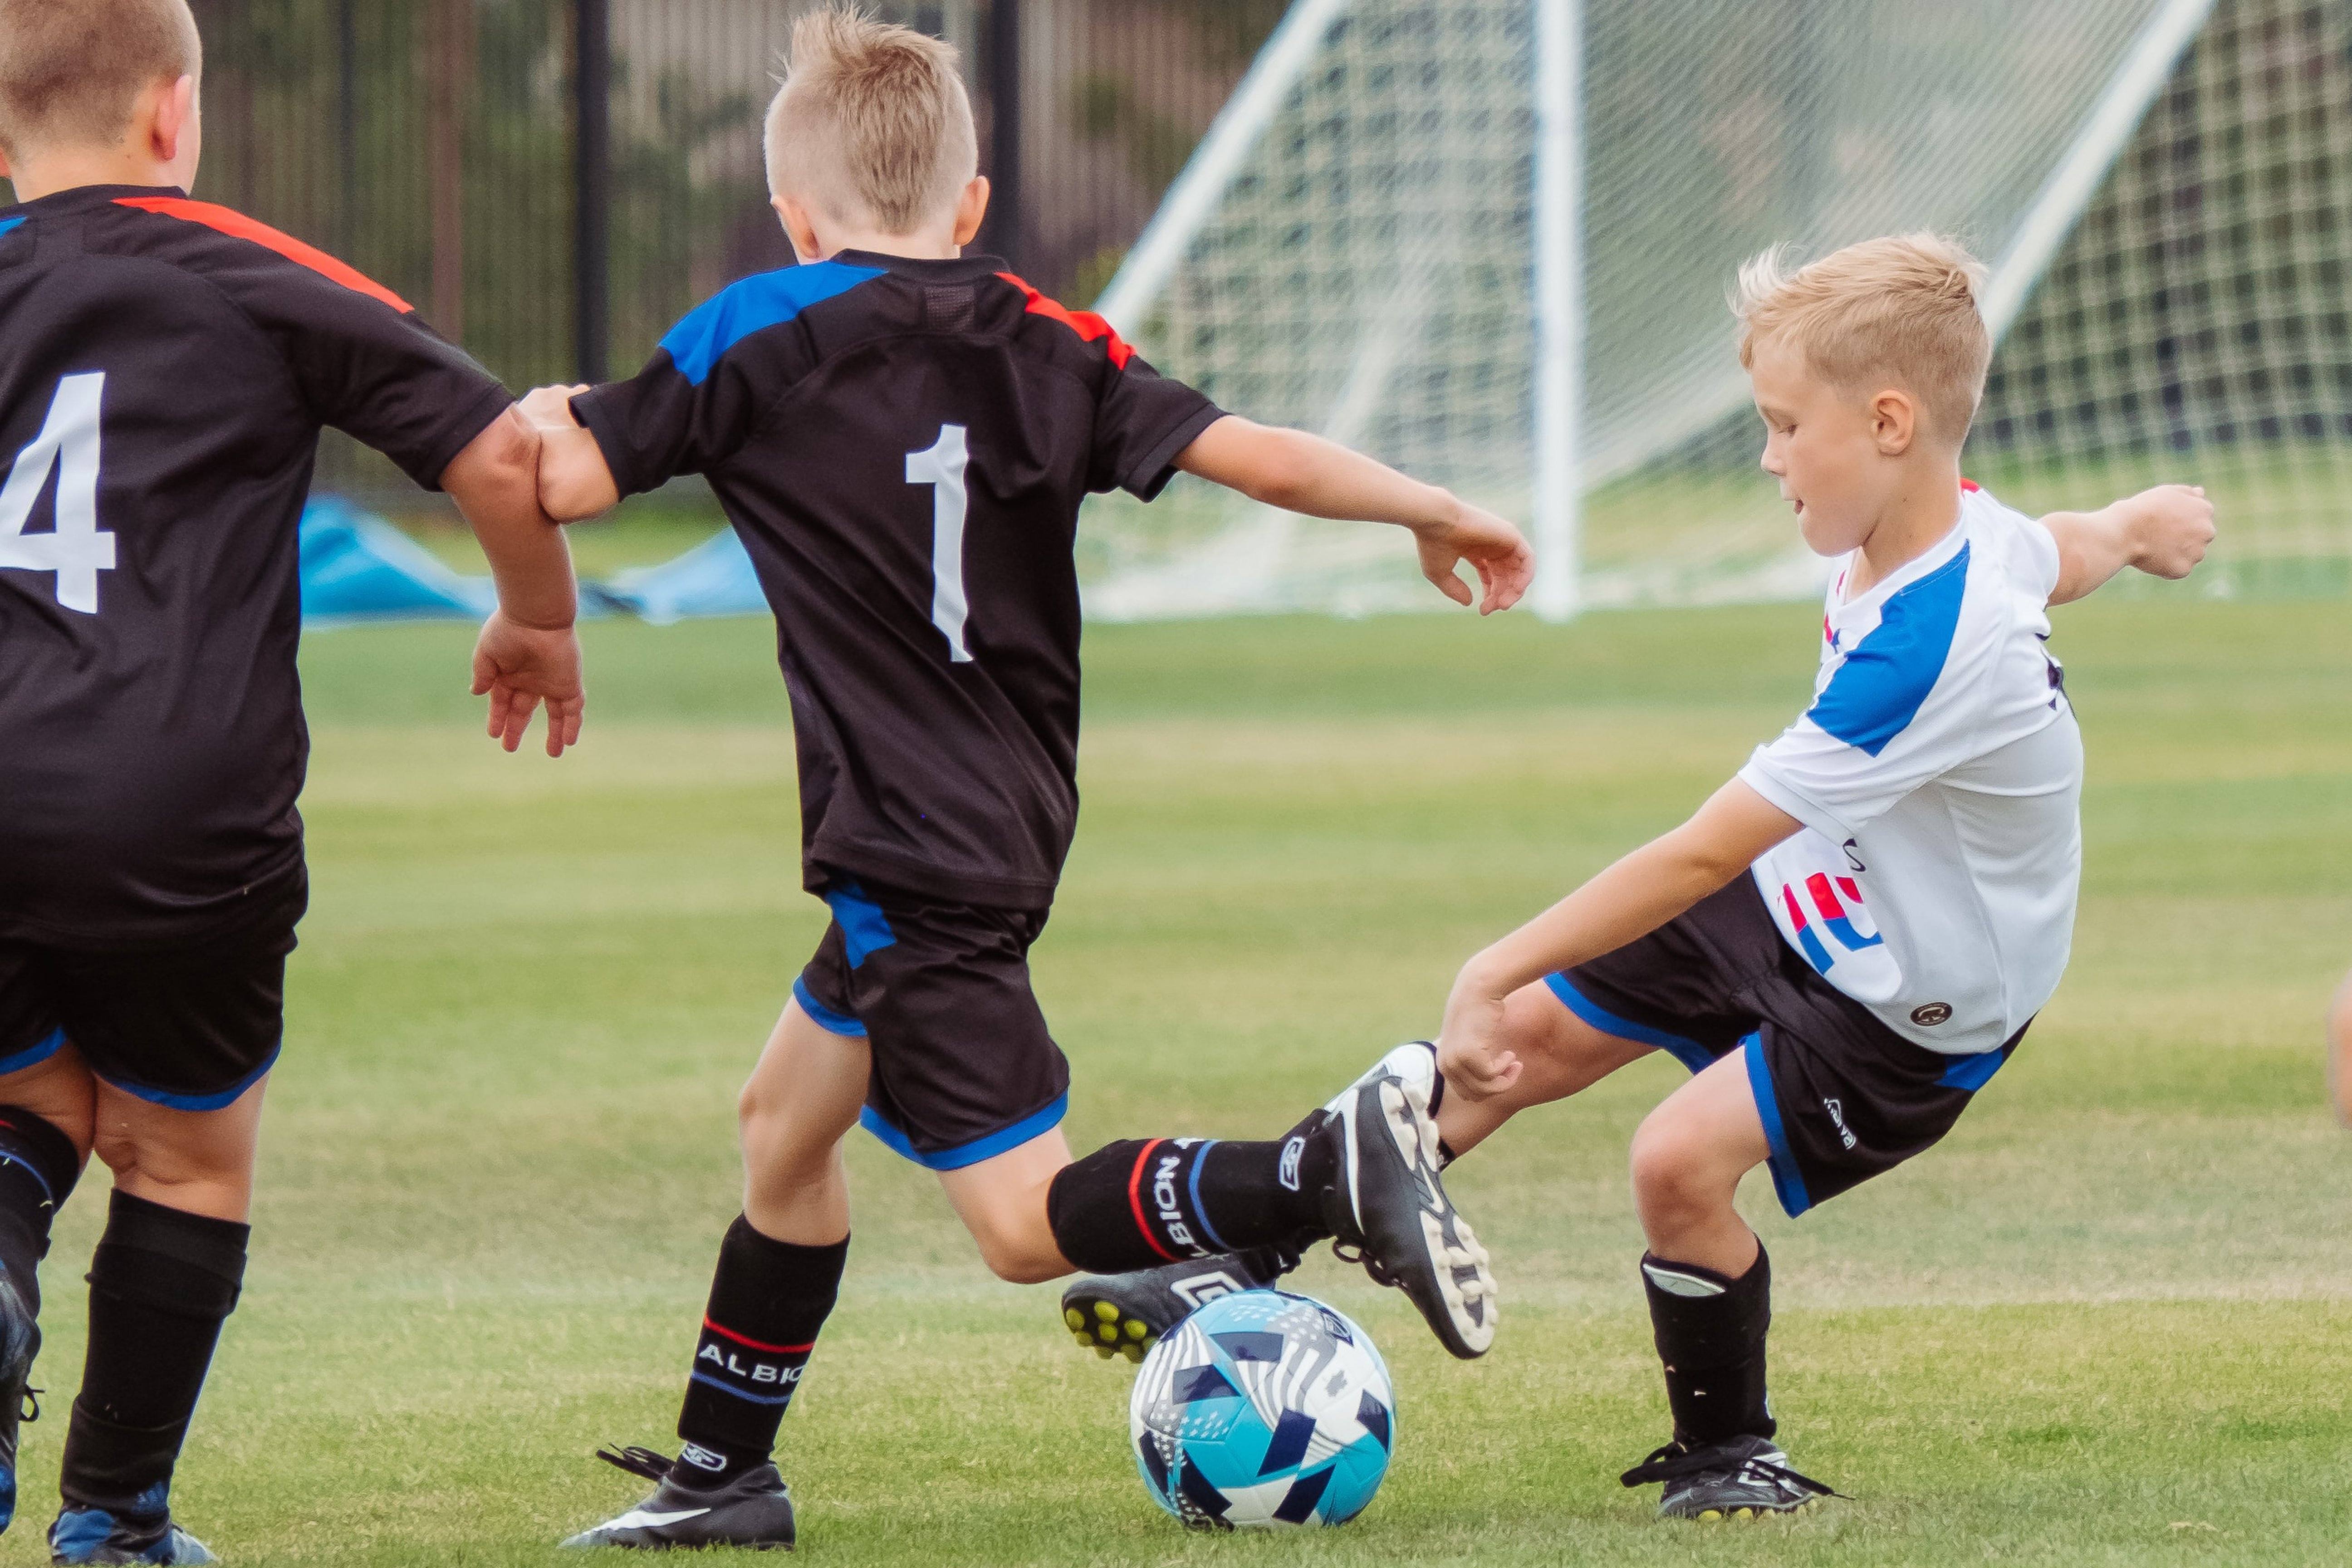 Top 7 Tips to Make Football Training Fun for Kids